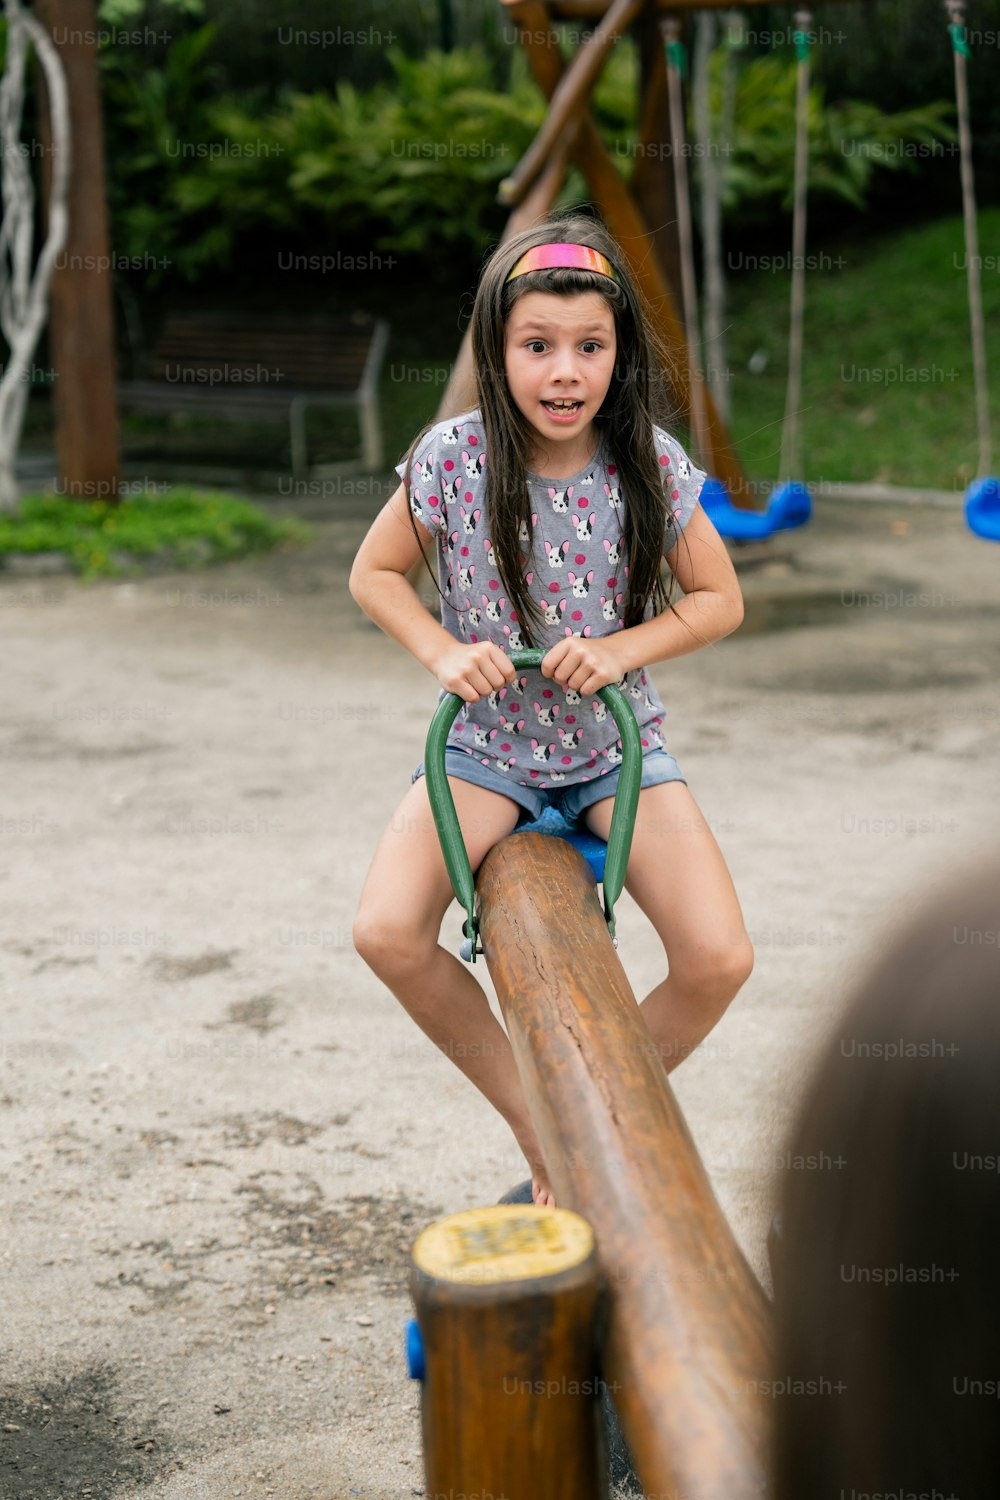 a little girl riding a wooden log on a playground